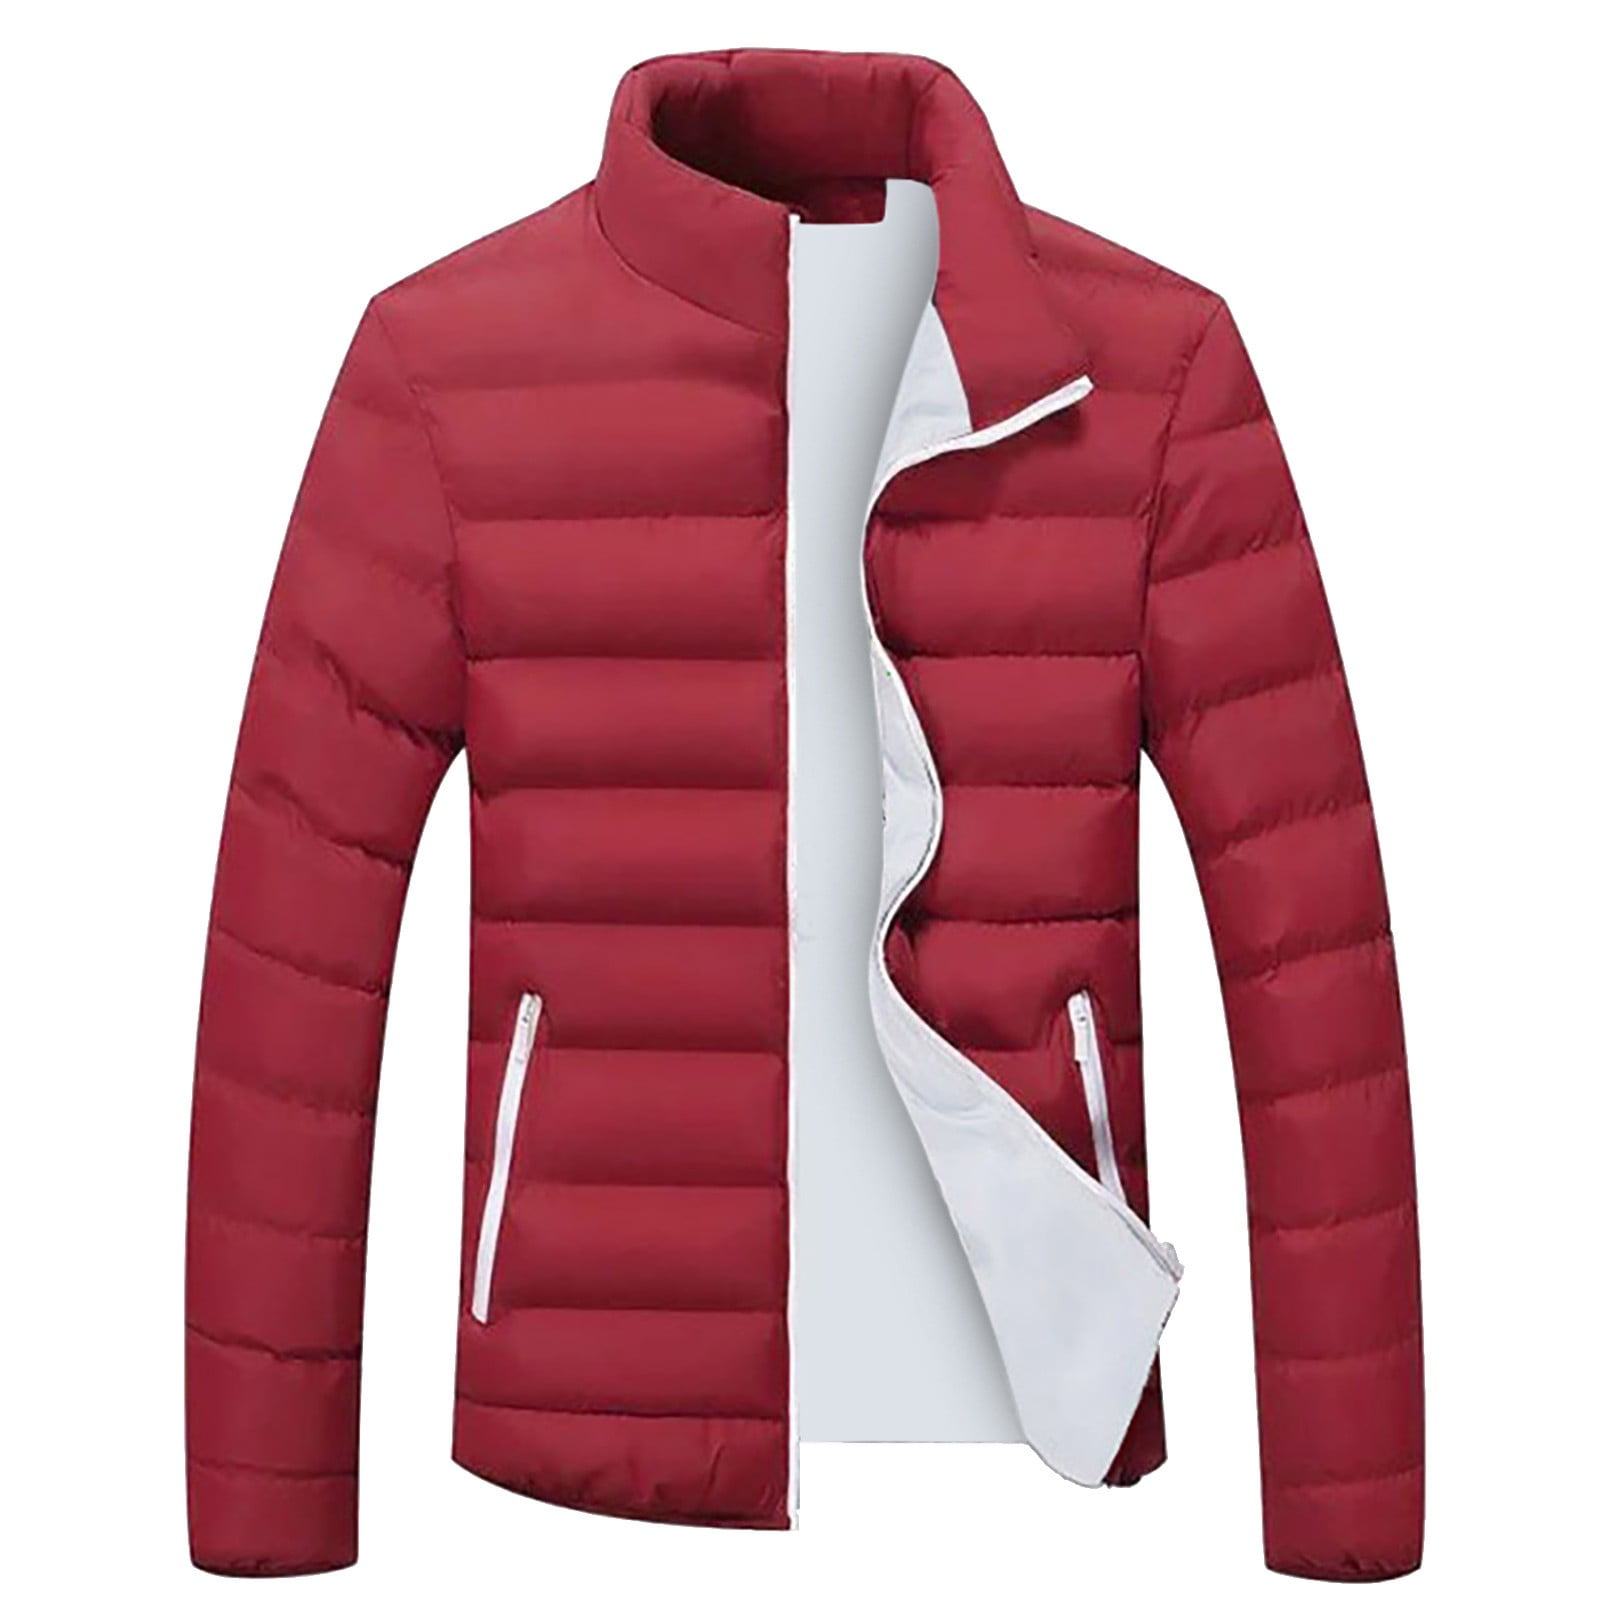 Jackets for Men Casual Mens Jacket Men Winter Warm Slim Fit Thick Bubble Coat Casual Jacket Outerwear Top Mens Coats Puffy Winter Jackets for Men Winter Jackets for Men Red Xxxxxxl -